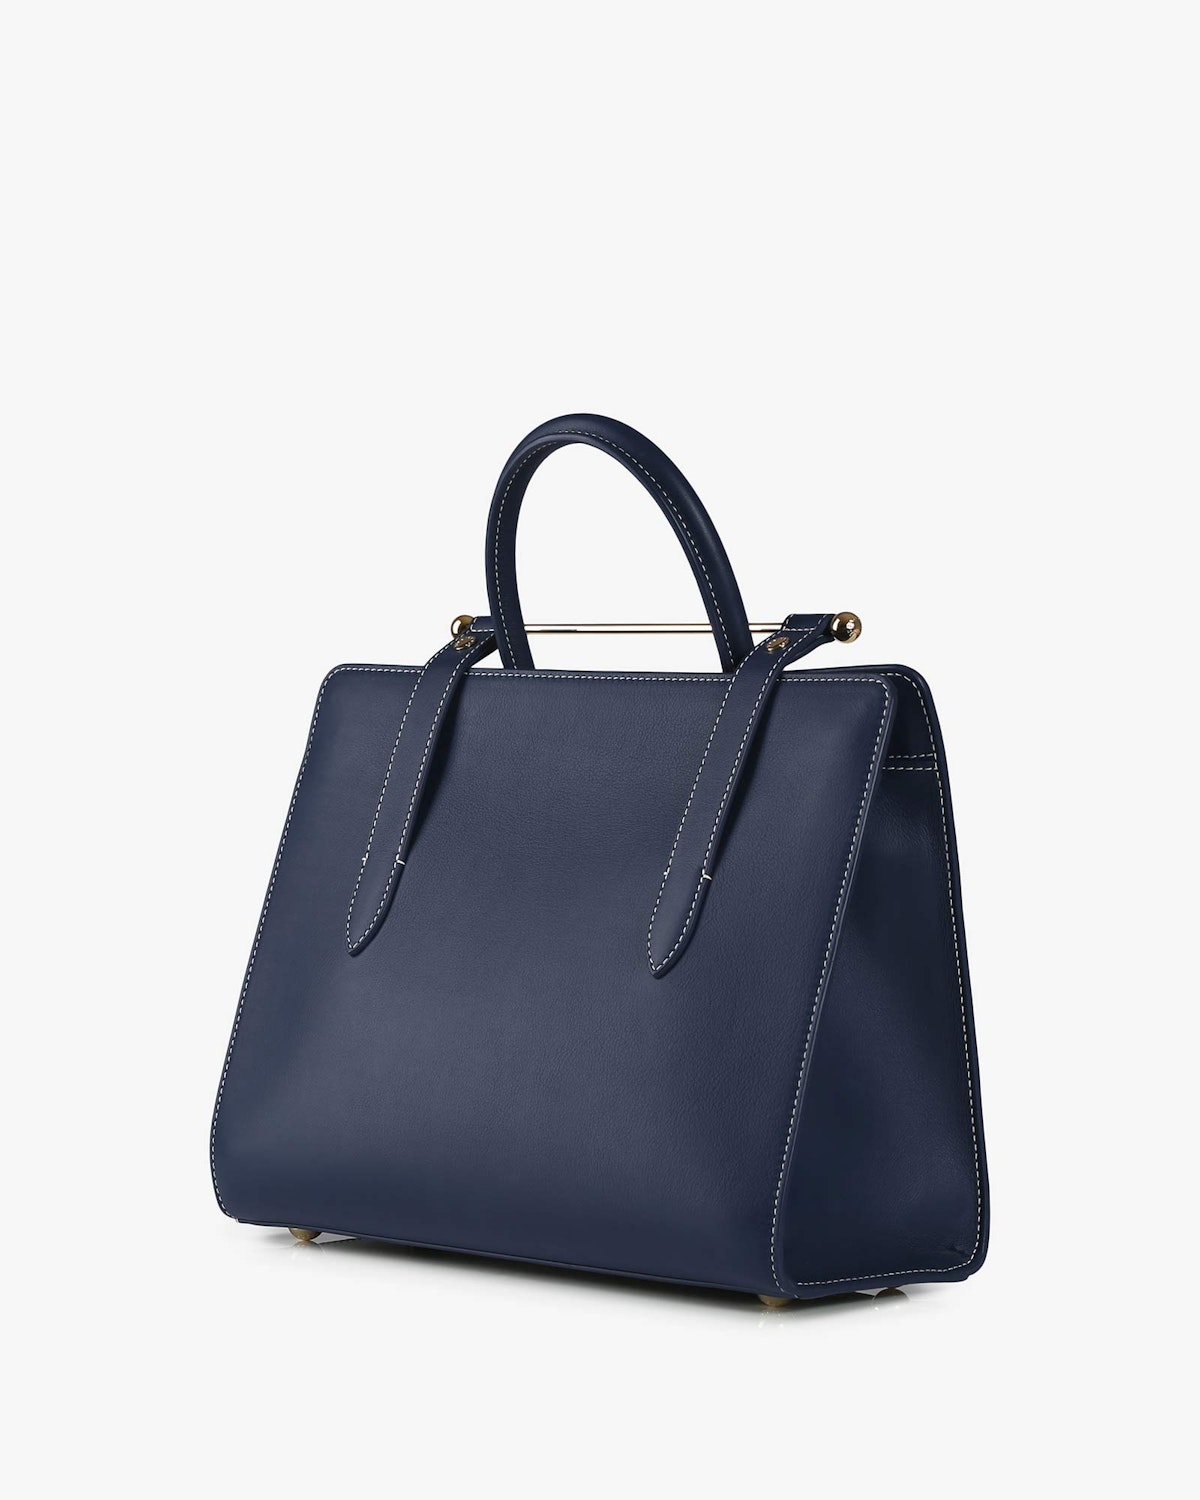 The Strathberry Midi Tote - Top Handle Leather Tote Bag - Navy ...